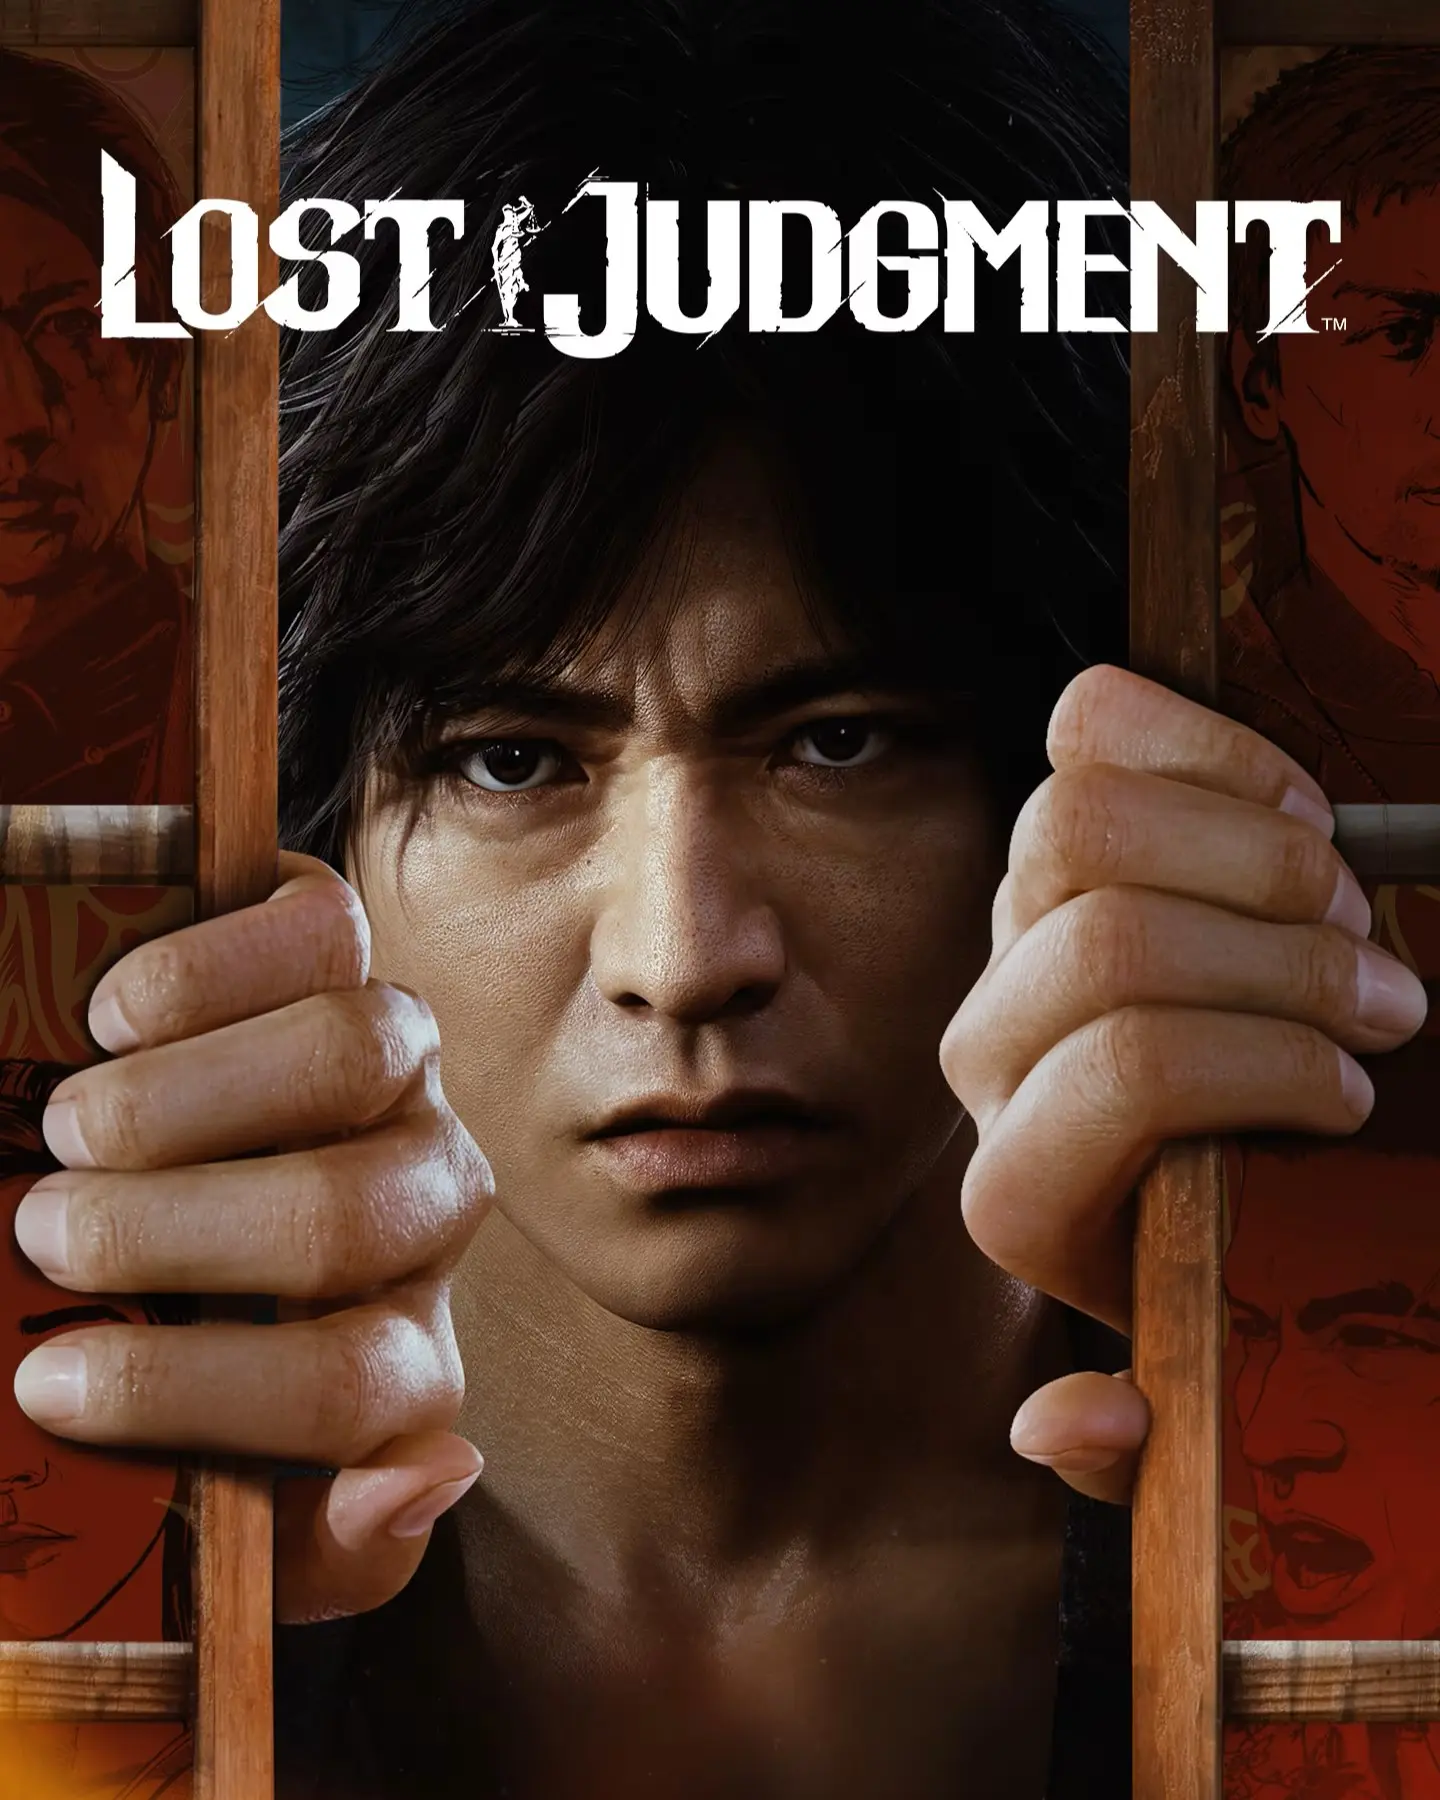 Lost Judgment Digital Deluxe Edition (AR) (Xbox One / Xbox Series X|S) - Xbox Live - Digital Code